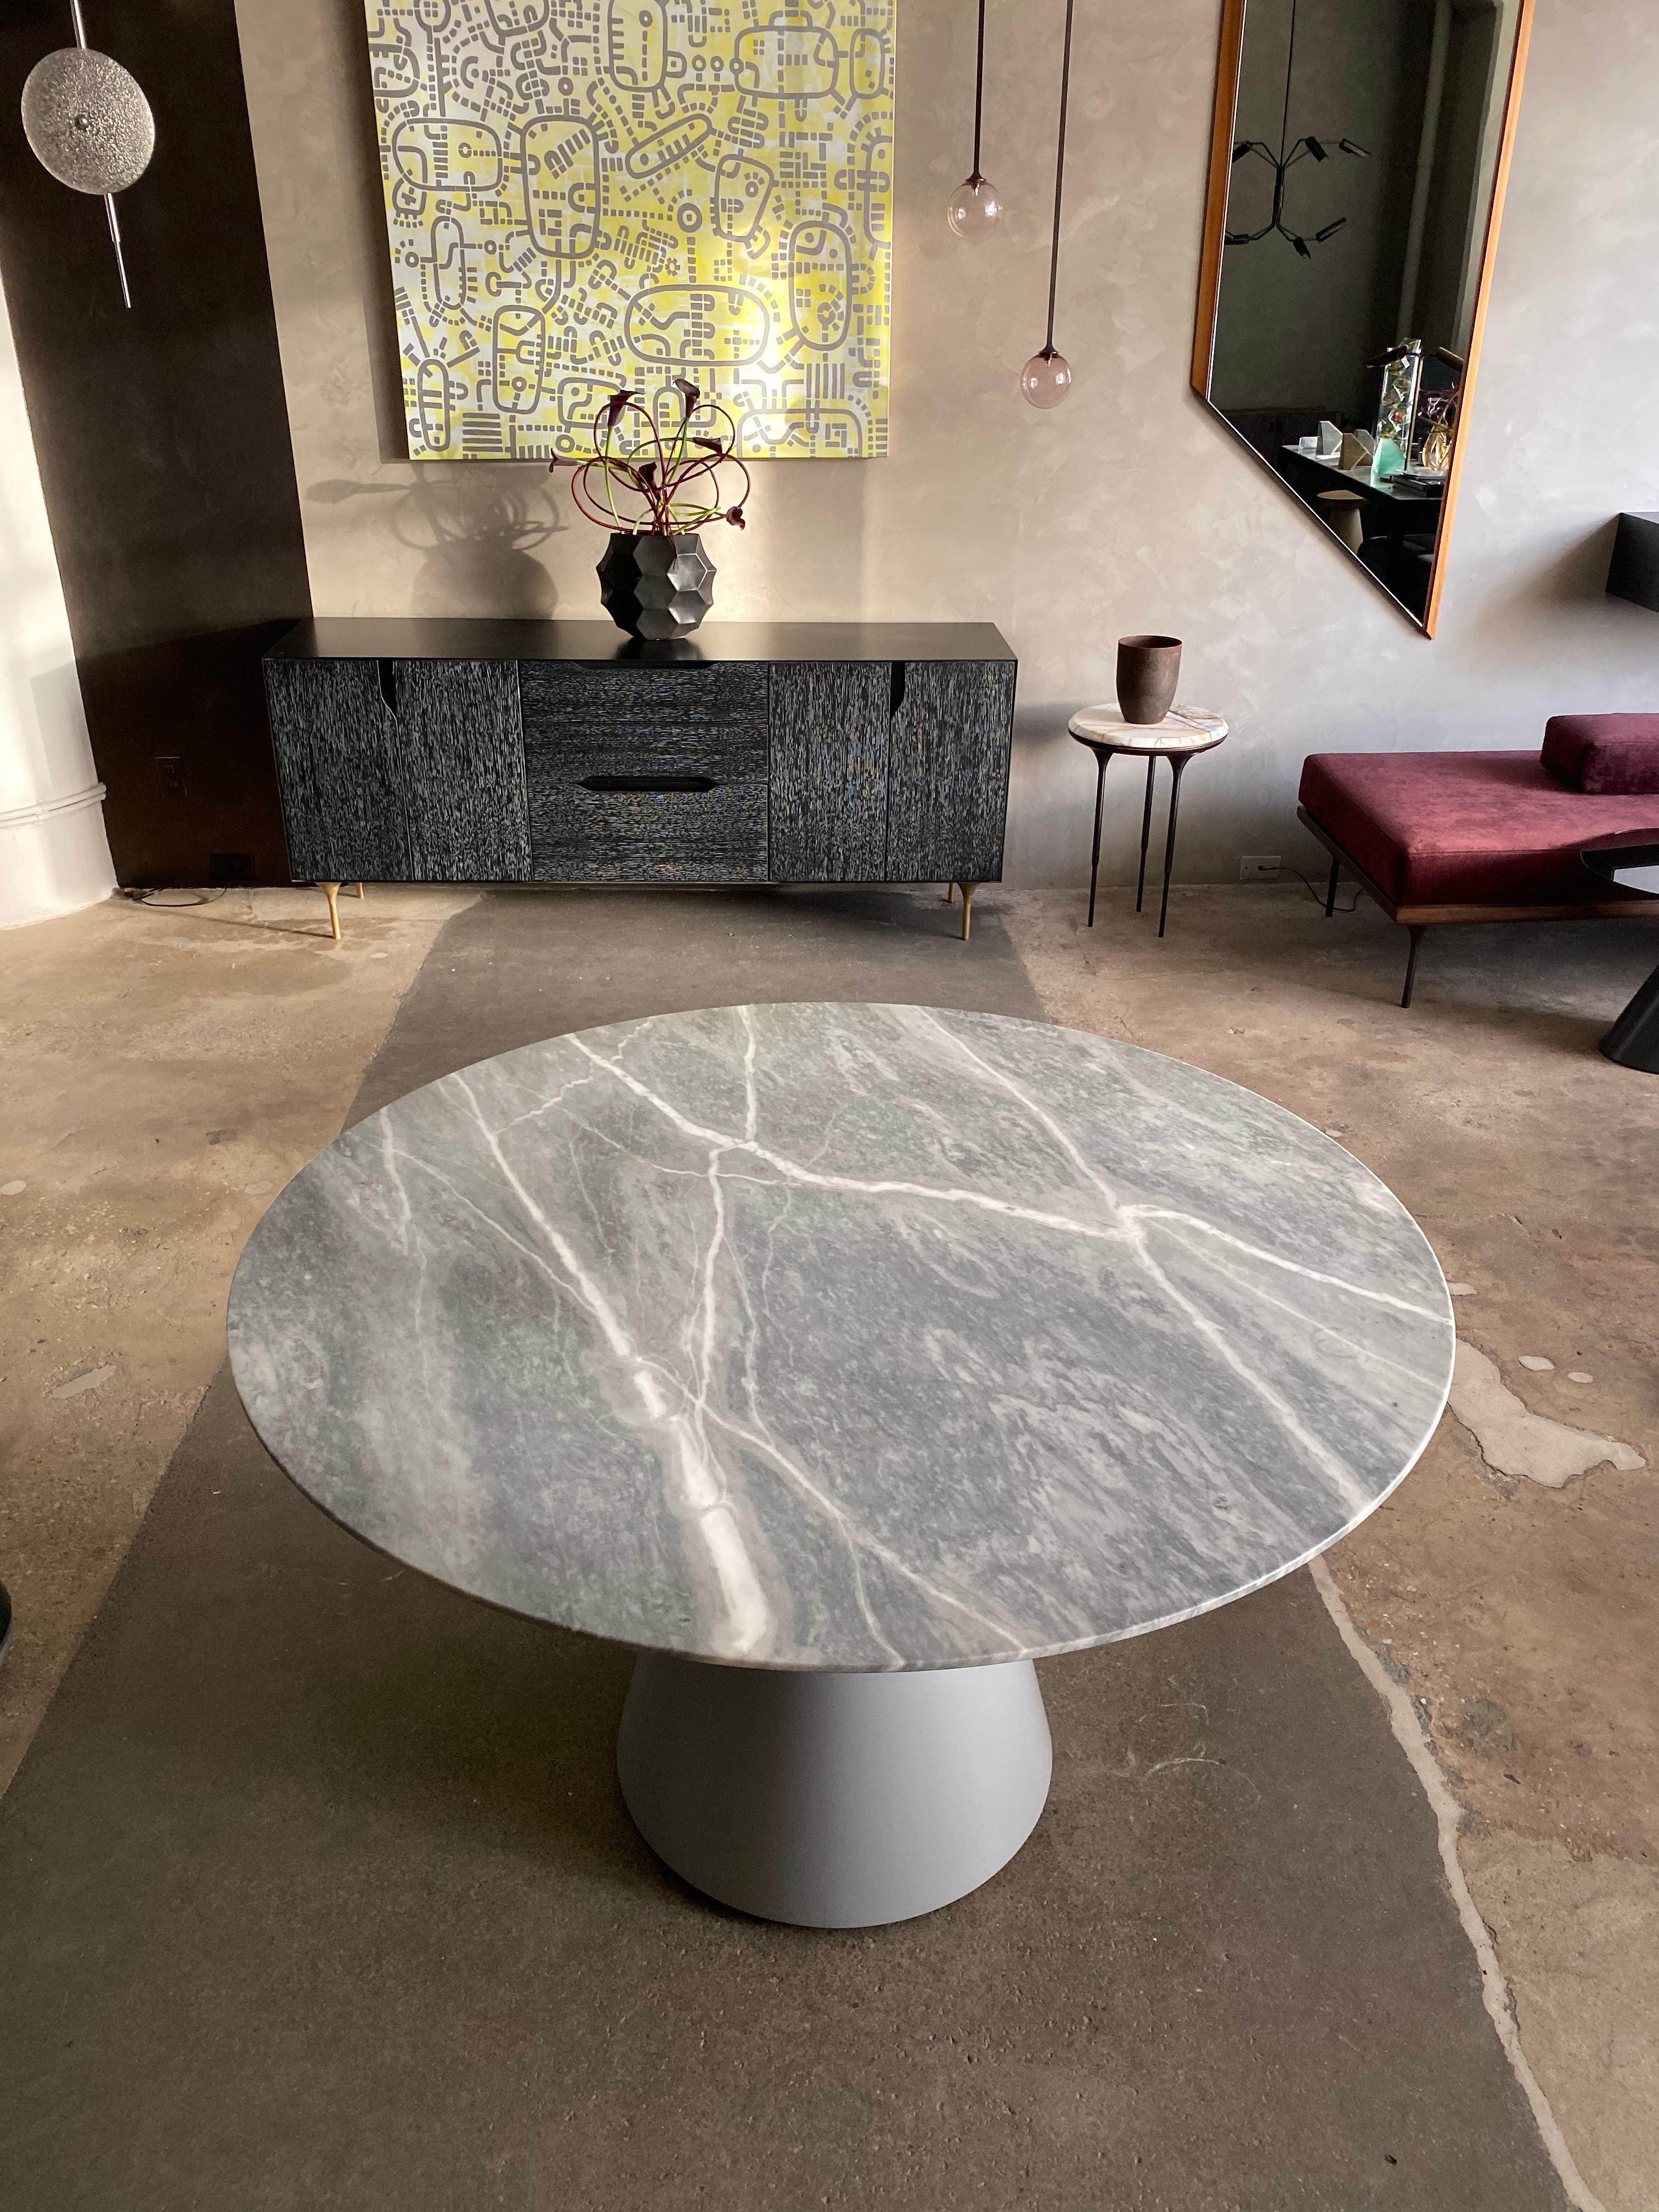 The Saturn table is a single pedestal table that can be used as a dining or occasional table. It’s simple yet meticulous design, materials, textures and details make of this piece, a versatile table that can be used in different interiors, from a